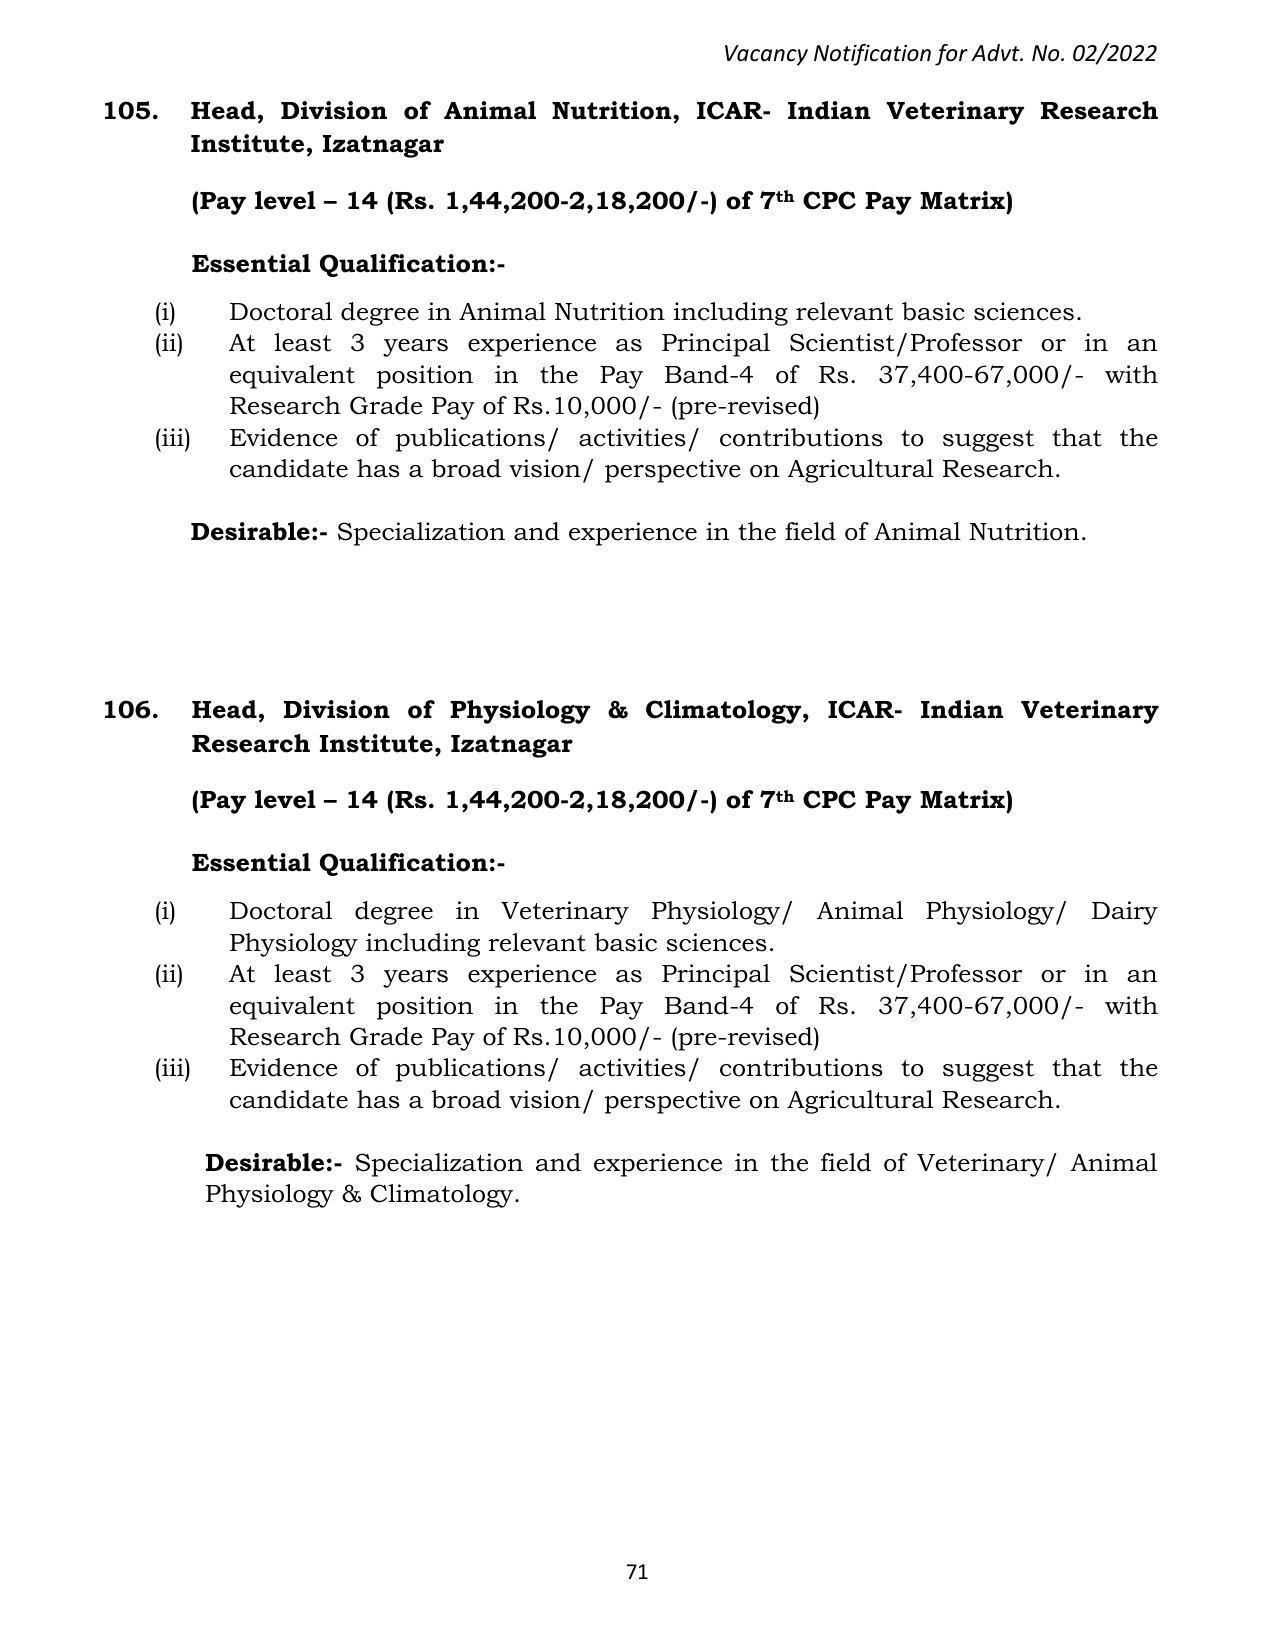 ASRB Non-Research Management Recruitment 2022 - Page 24